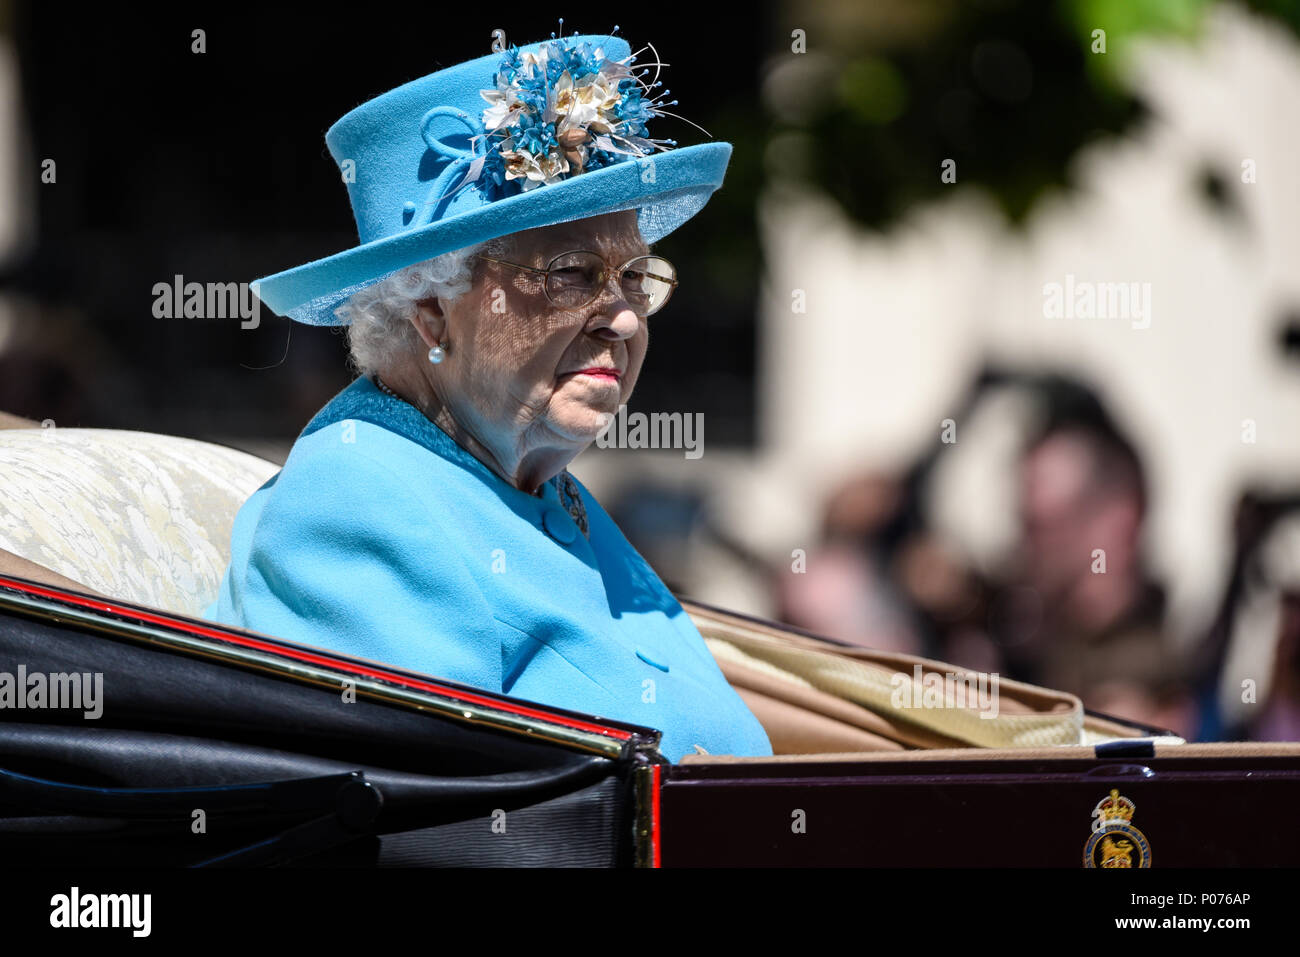 Trooping the Colour 2018. The Queen heading towards Horse Guards on her own in a carriage in The Mall, London,  in blue Angela Kelly design outfit Stock Photo